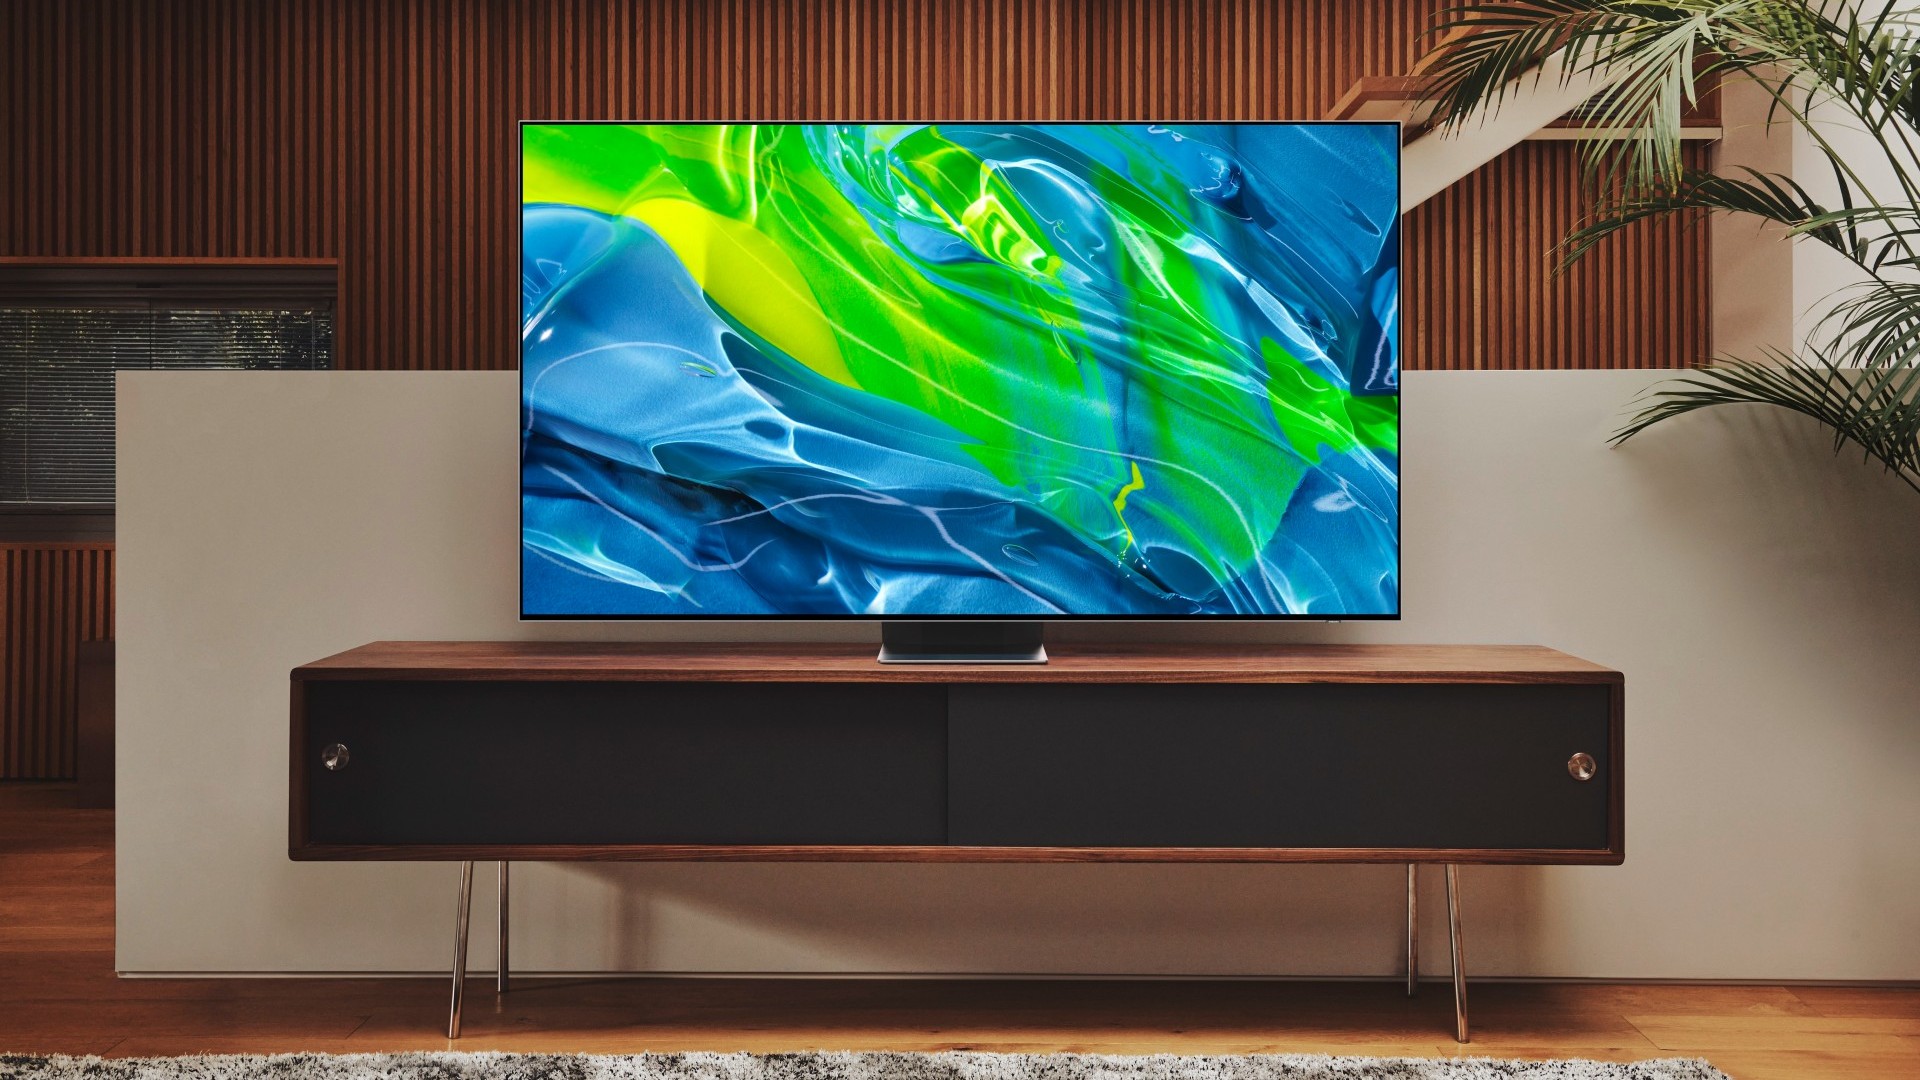 Samsung S95B OLED on a wooden TV stand